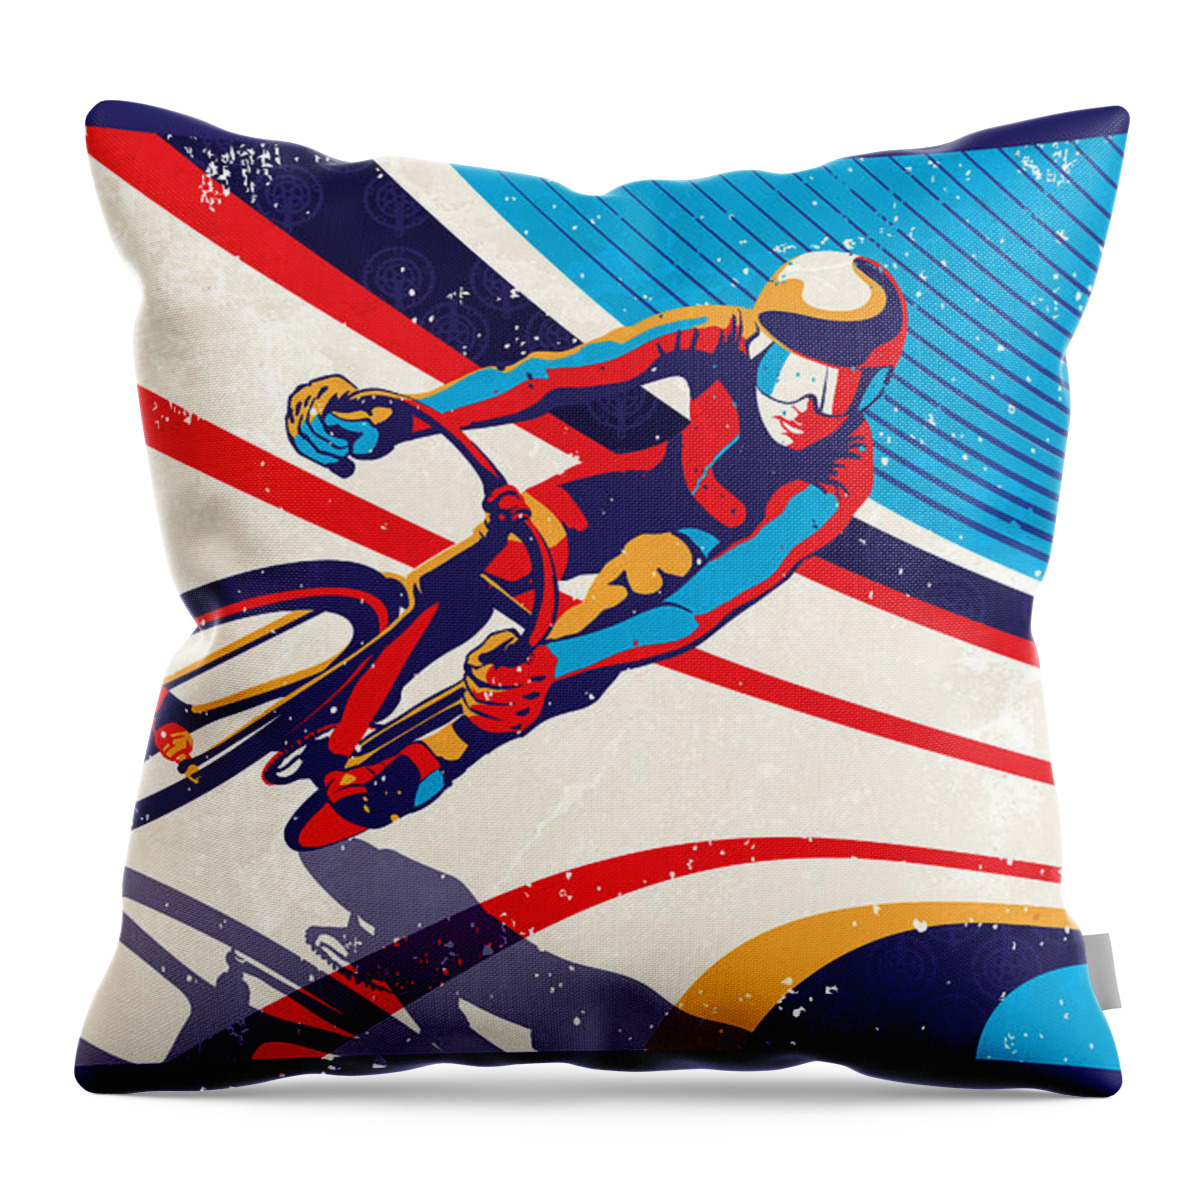 Cycling Throw Pillow featuring the painting Track Cyclist by Sassan Filsoof